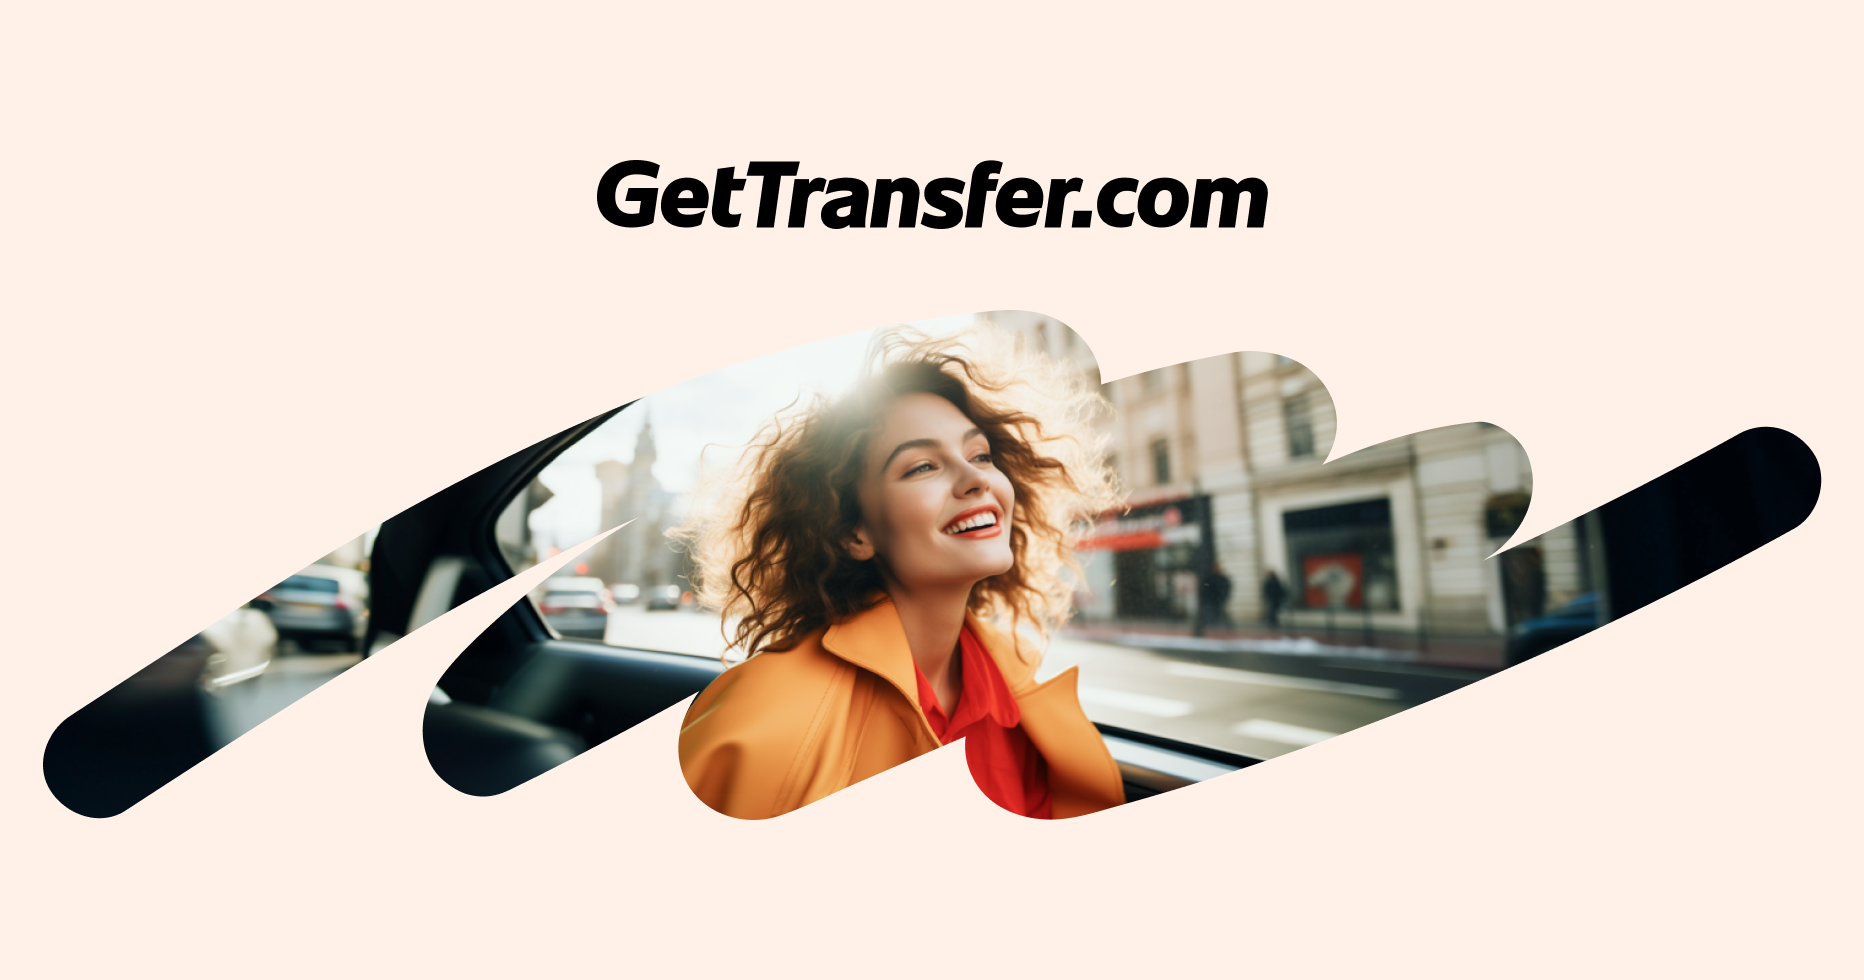 GetTransfer Affiliate Program: Transfers in More Than 150 Countries